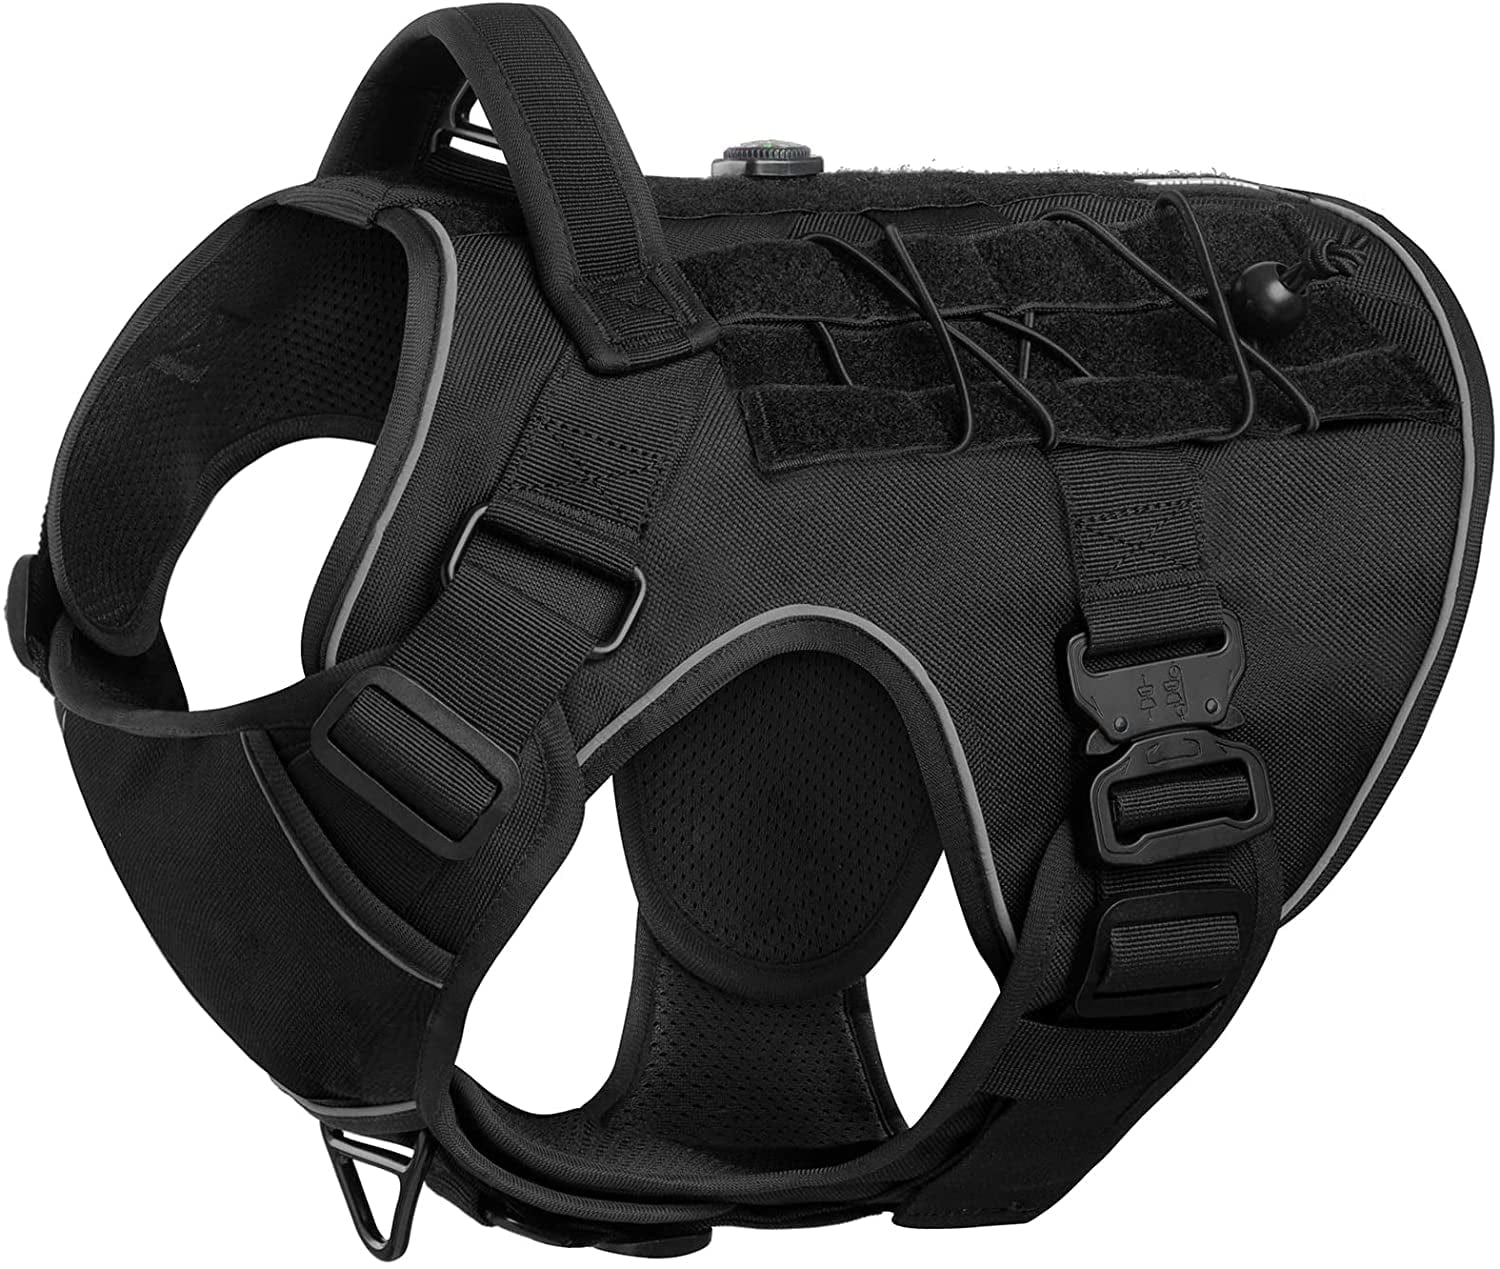 DNALLRINO Tactical Dog Harness for Large Medium Dogs, Heavy Duty Military Dog Harness with Handle, Adjustable No Pull Service Dog Harness with Molle & Loop Panels for Hiking Walking Training Animals & Pet Supplies > Pet Supplies > Dog Supplies > Dog Apparel Dnallrino Black Classic S (Neck: 14.5" - 22.5", Chest: 23"-30") 